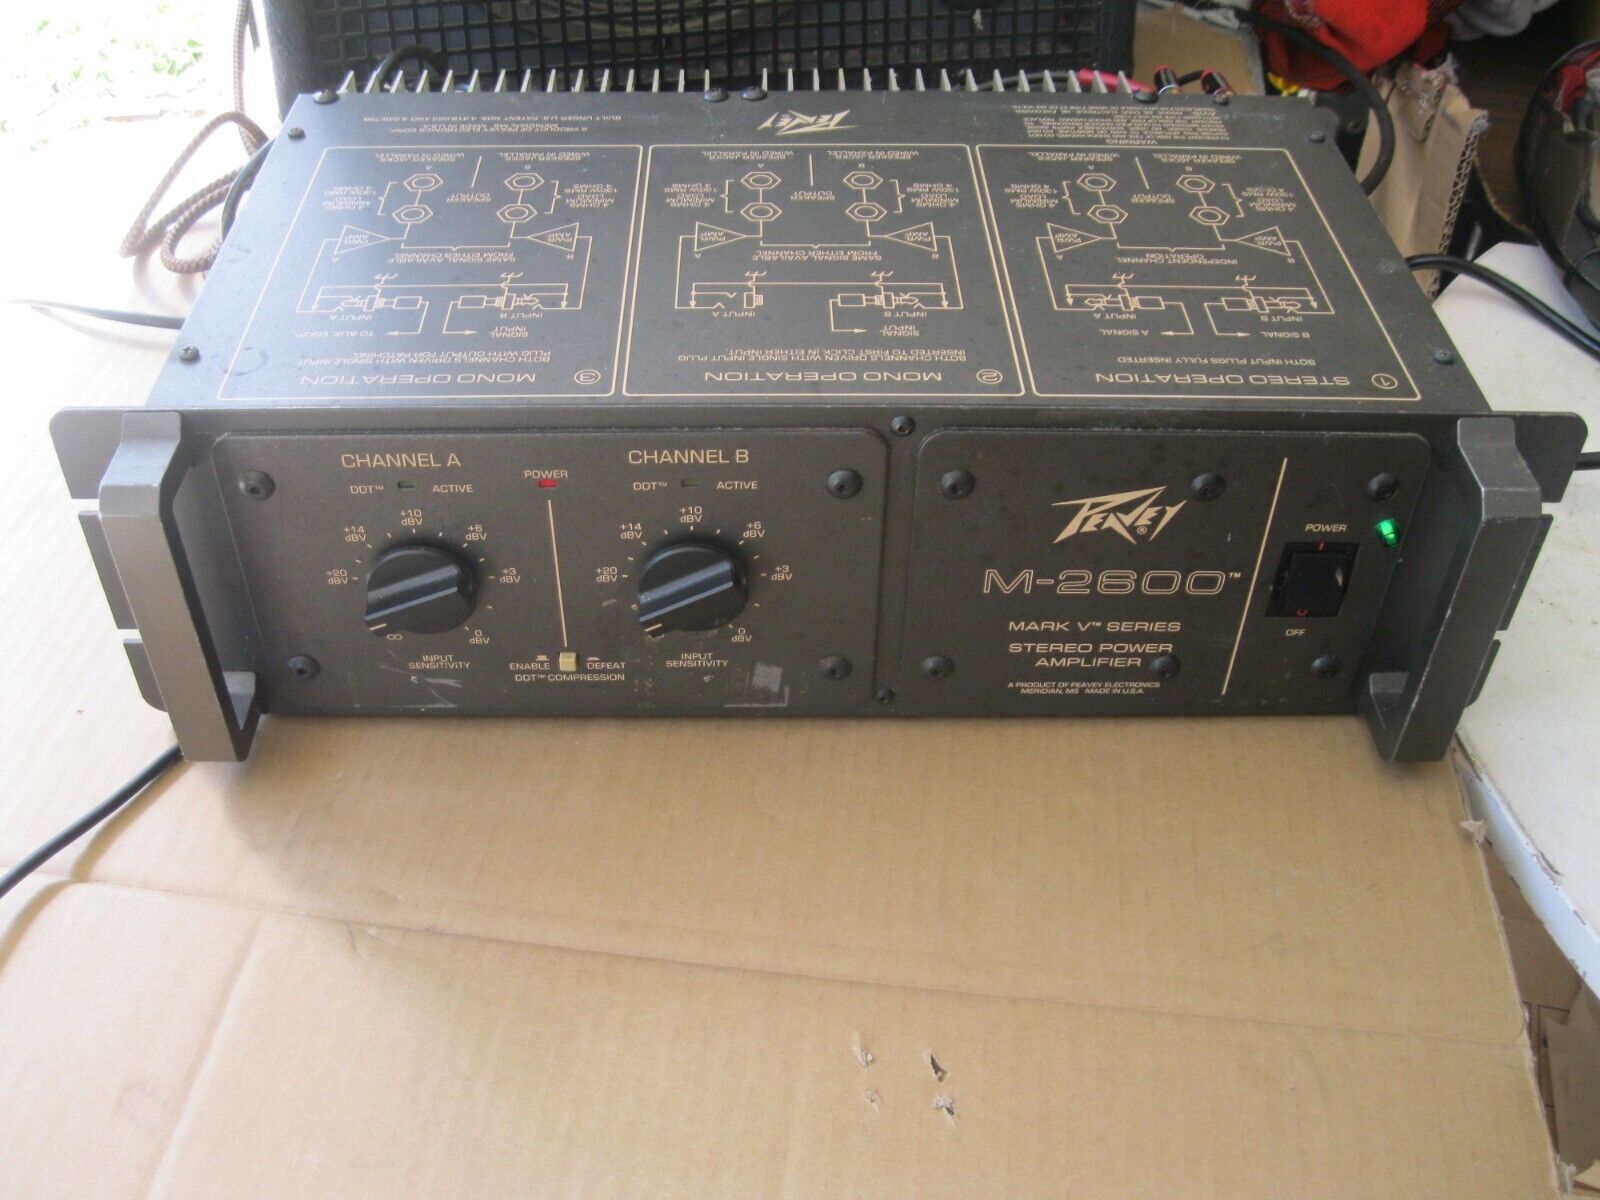 Vintage Peavey M-2600 power amplifier in very good condition - Watch video